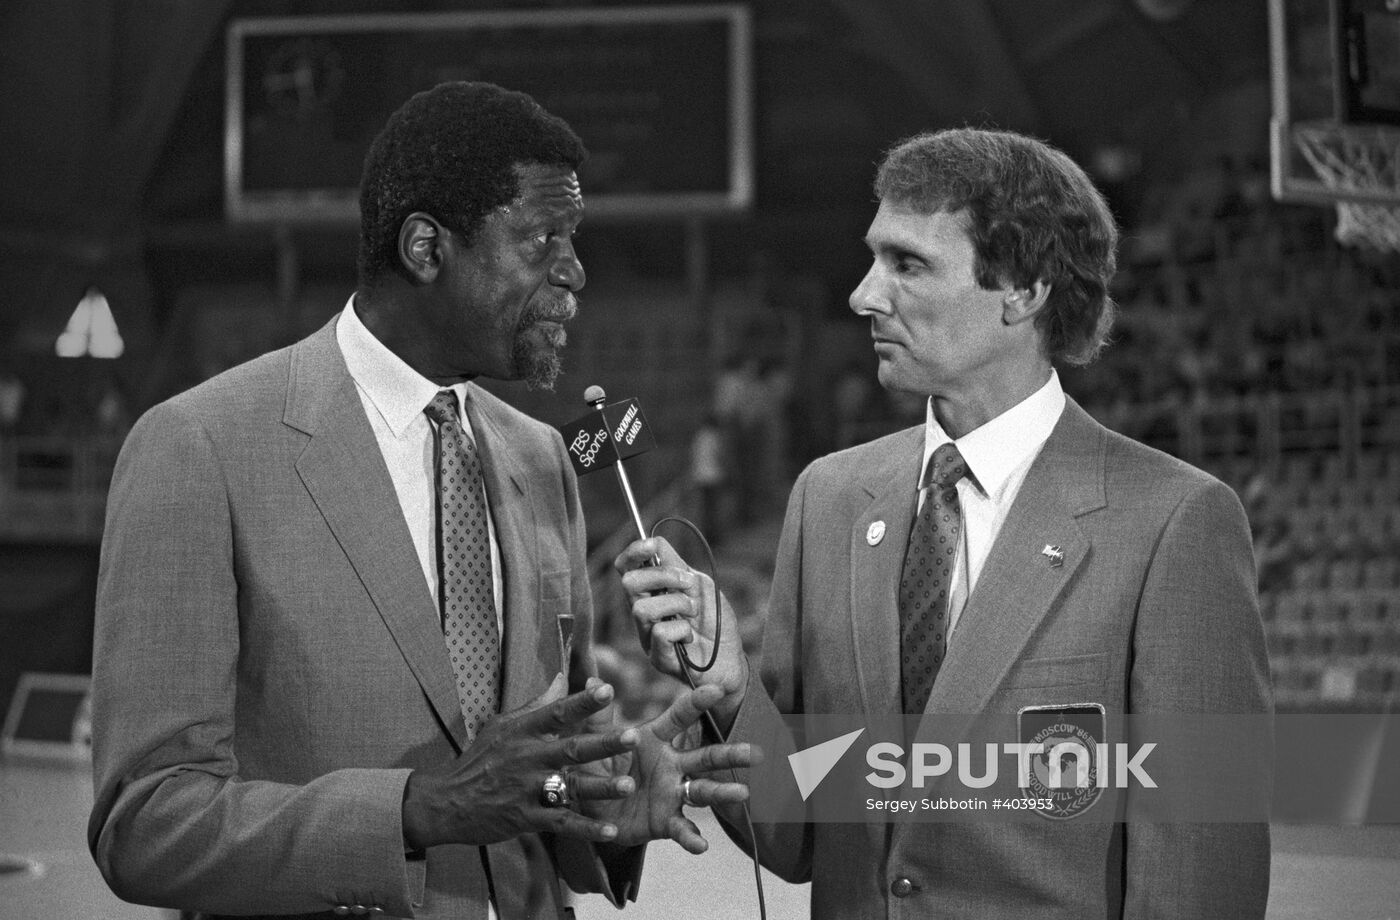 Basketball player William Russel and commentator Rick Barry